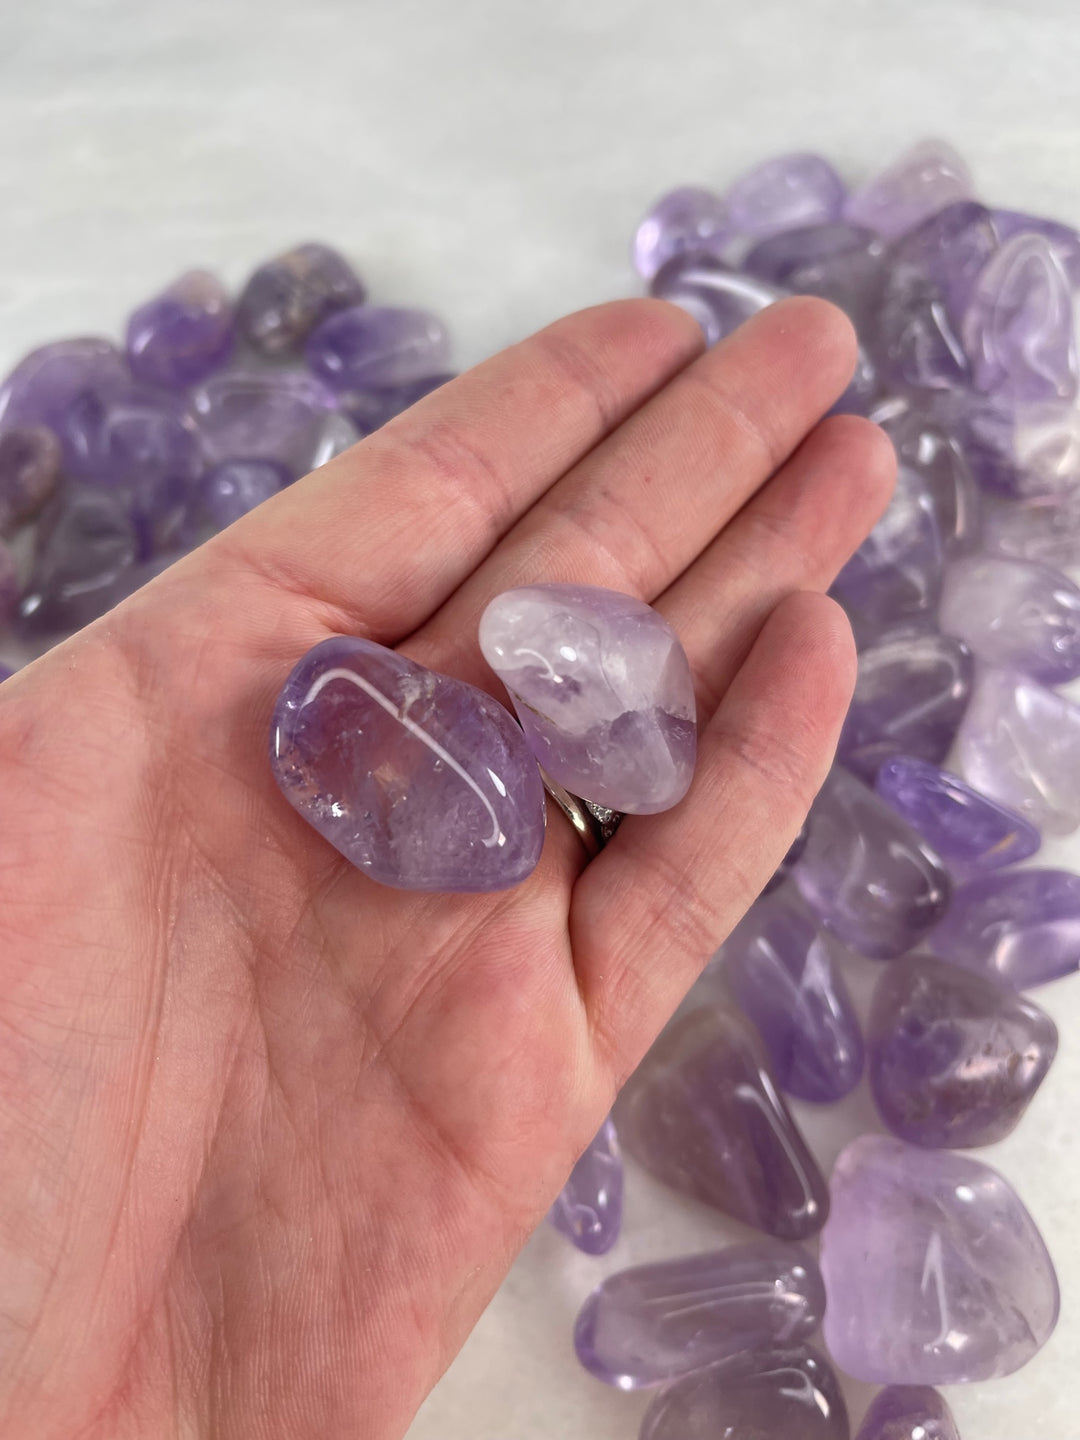 Light Amethyst Tumblers in the palm of a hand